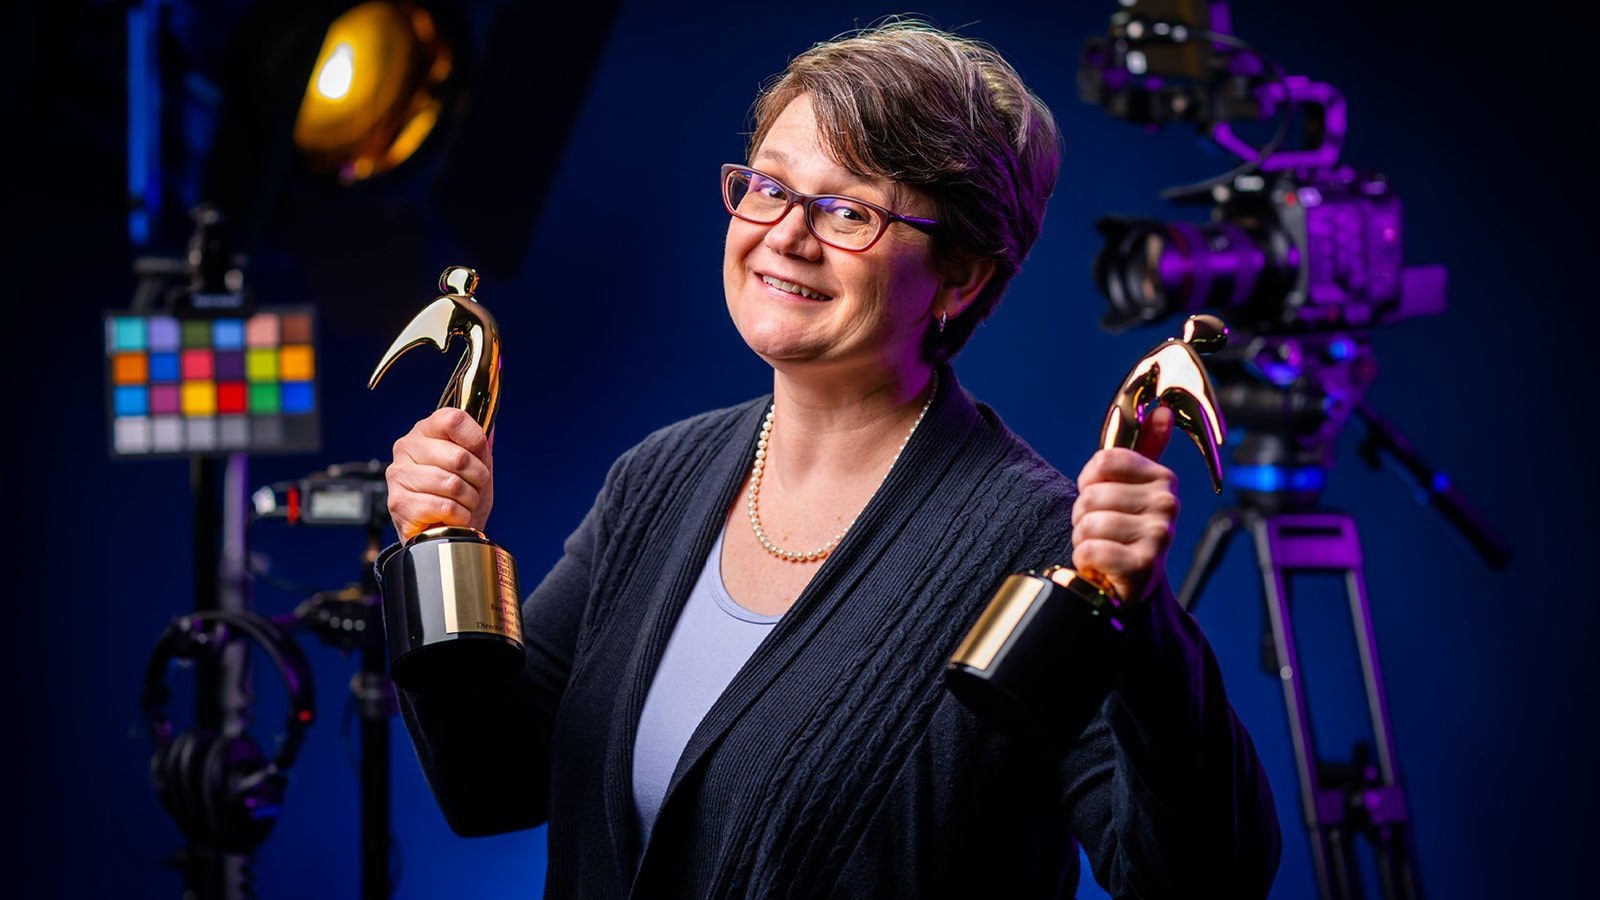 Jennie Jarvis stands in a studio with film cameras and stage lights. She is holding two Gold Telly statues.